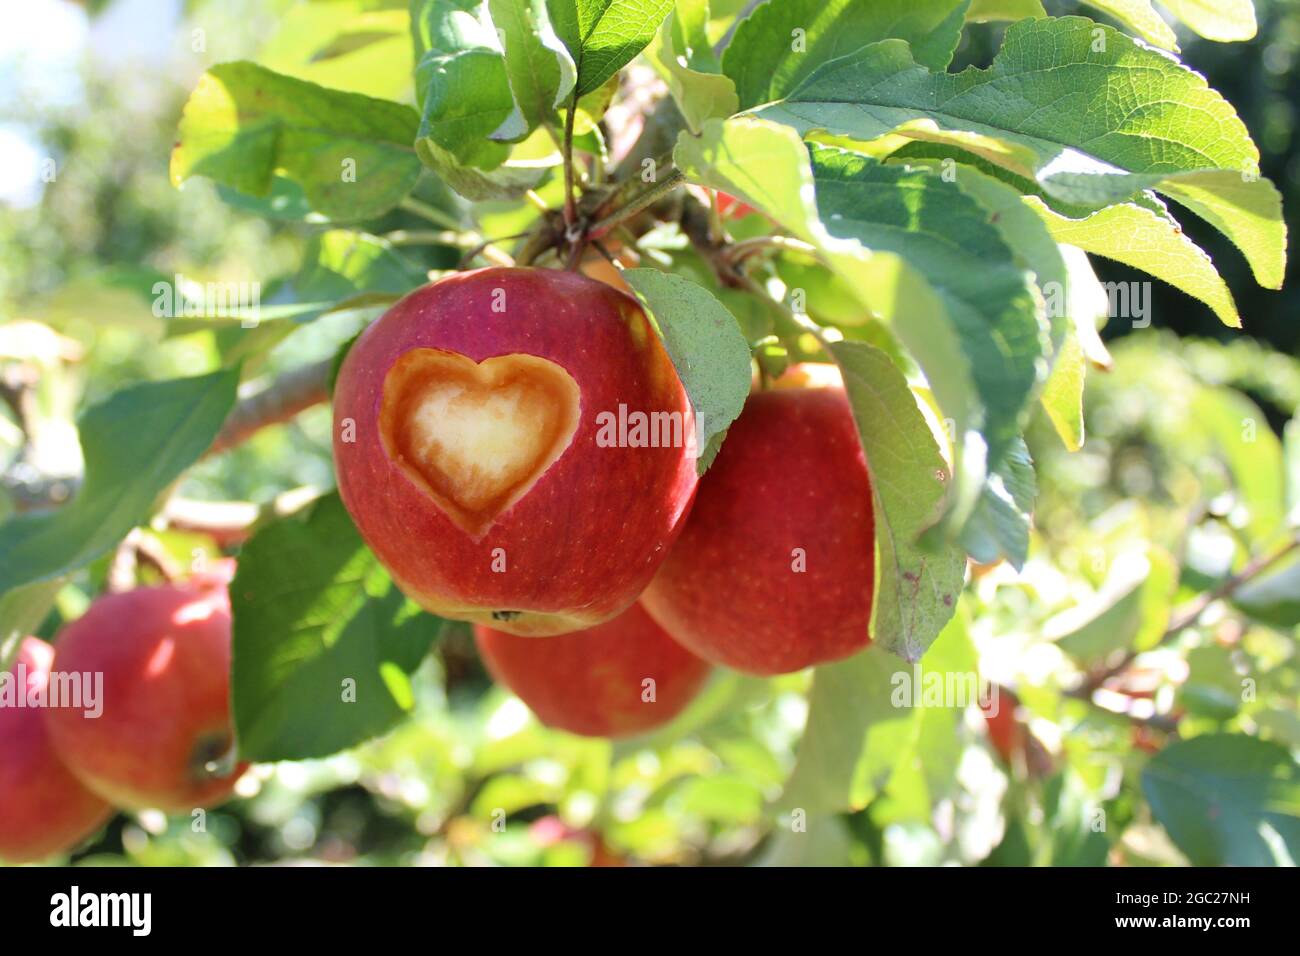 a apple with a carved heart on the apple tree Stock Photo